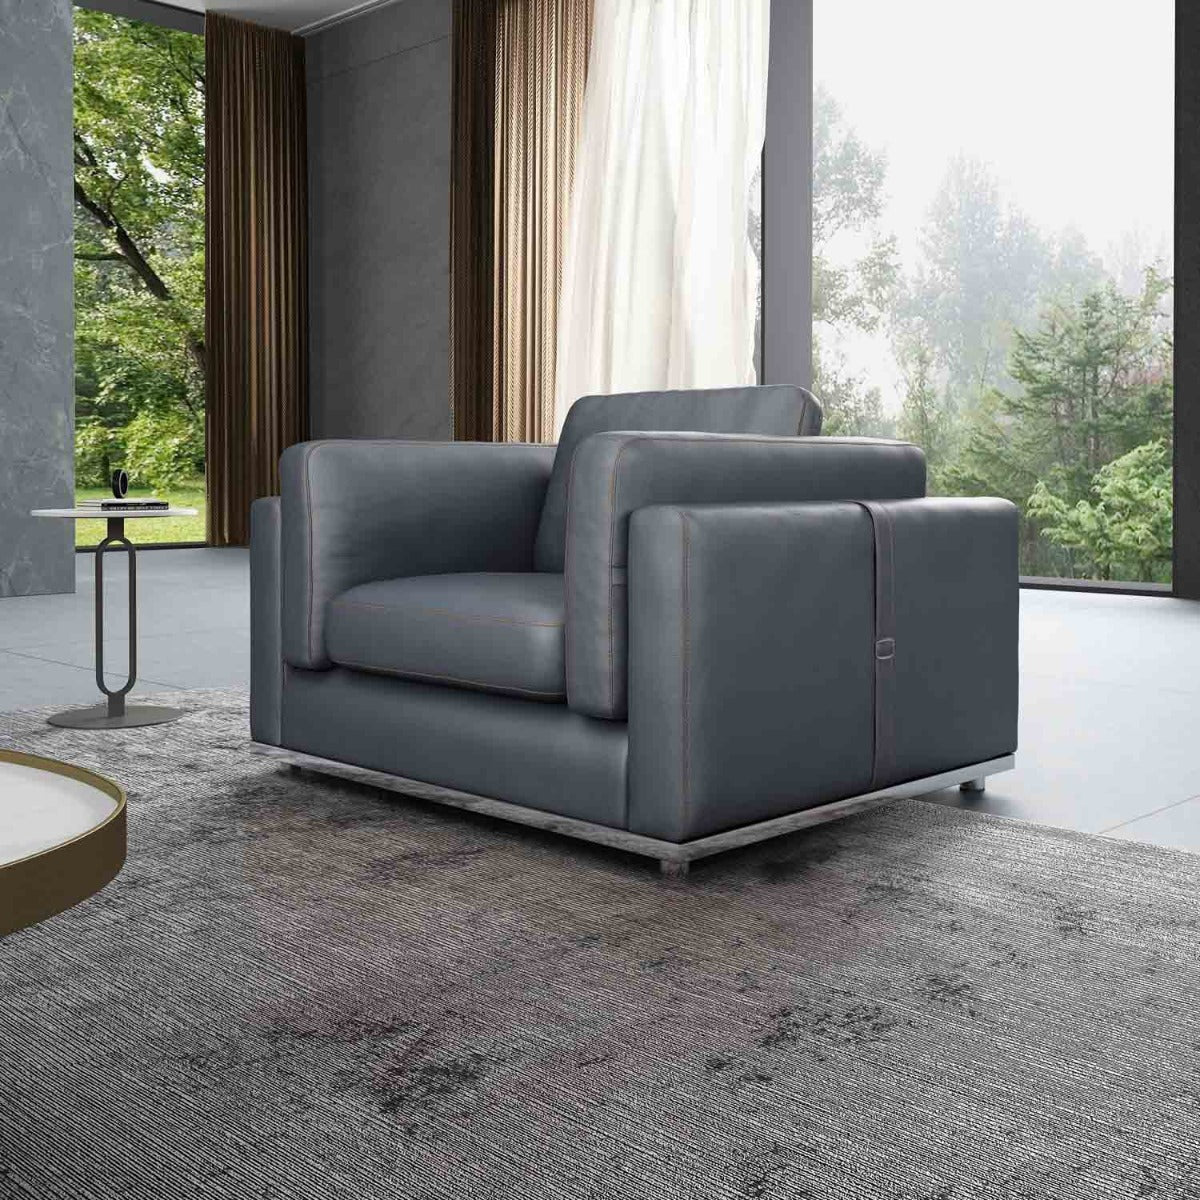 European Furniture - Picasso Chair in Smokey Gray - 25550-C - New Star Living